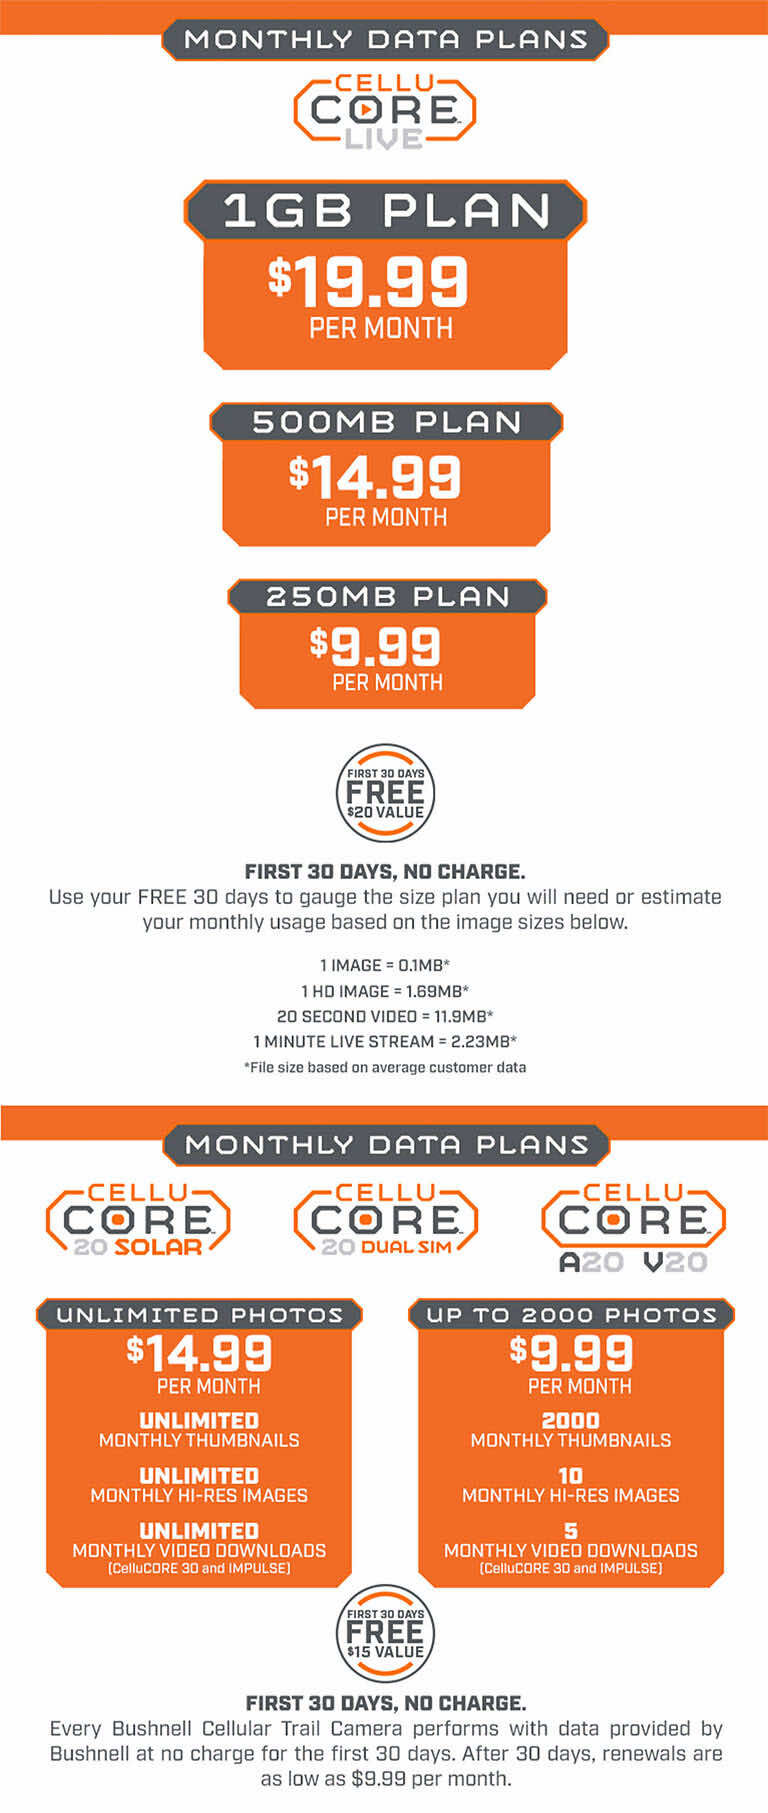 Cellular Data Plans for CelluCORE Live and CelluCORE 20 Trail Cameras